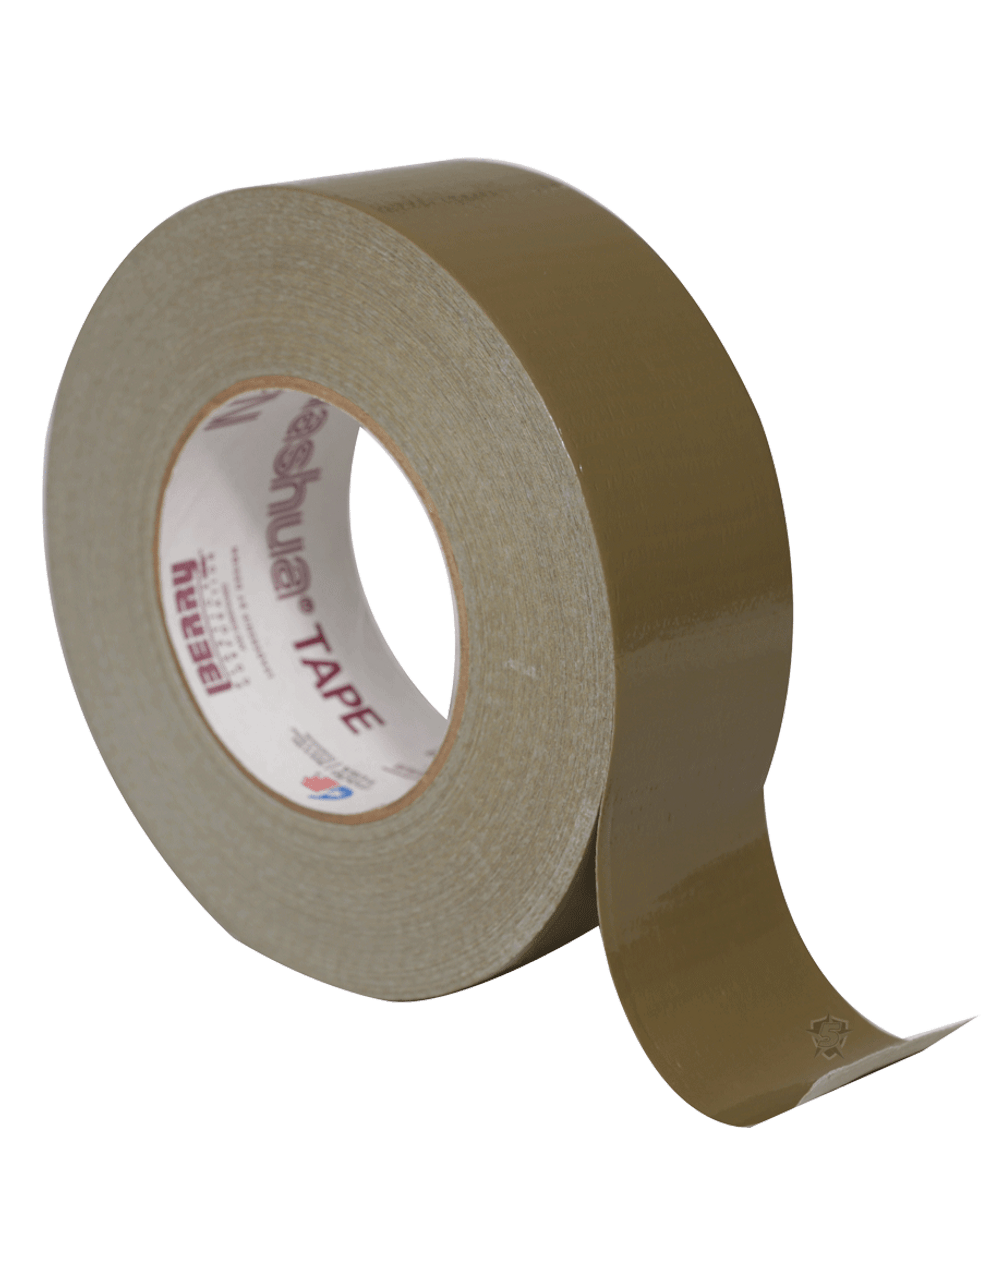 Duck Brown Duct Tape